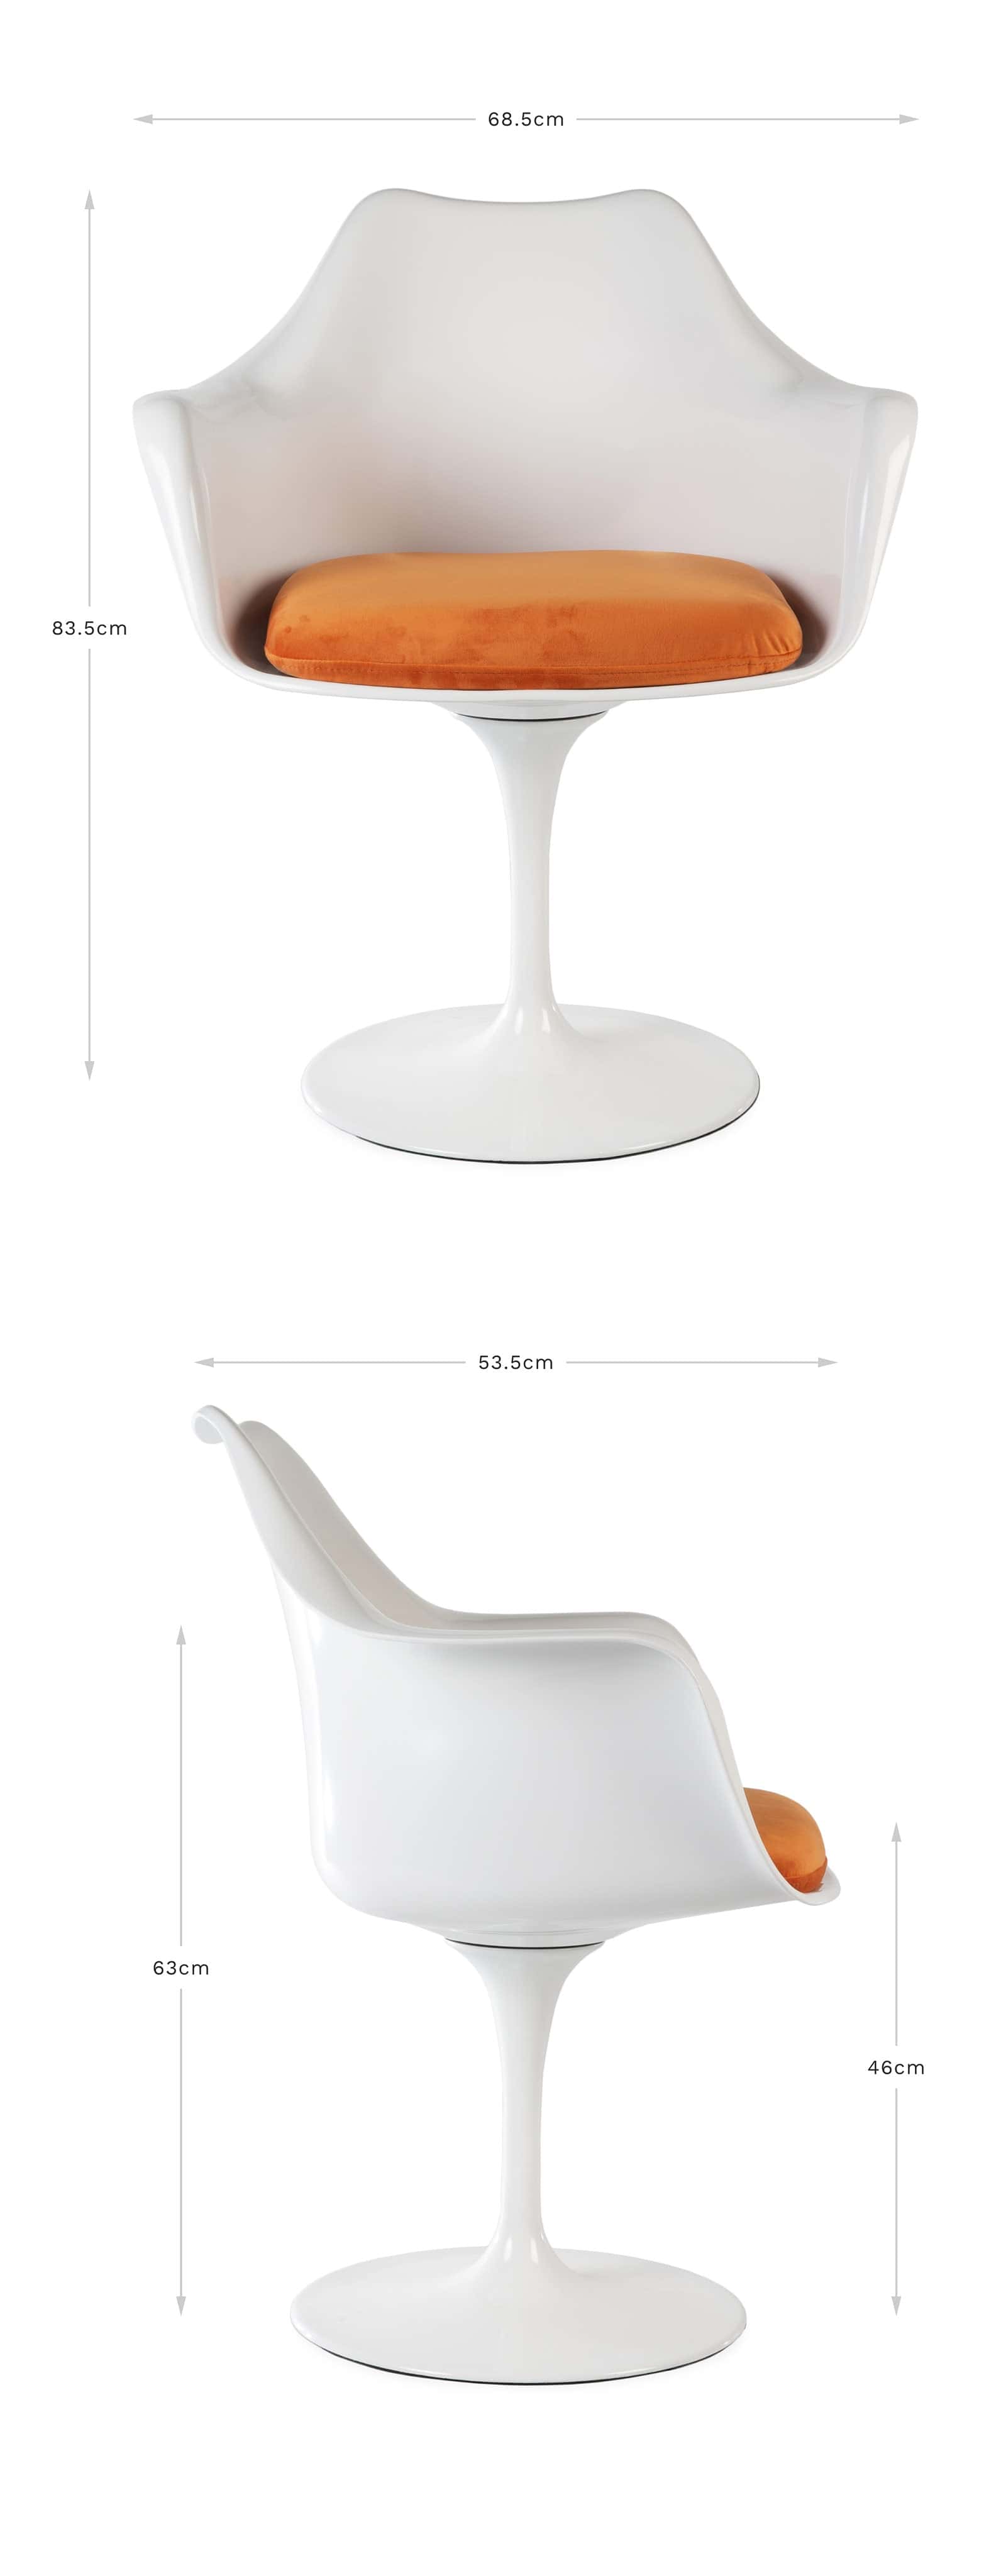 Modified for viewing on a tablet or mobile, this high res image shows a side and front view of the Tulip Dining Arm Chair with dimensions given in cm